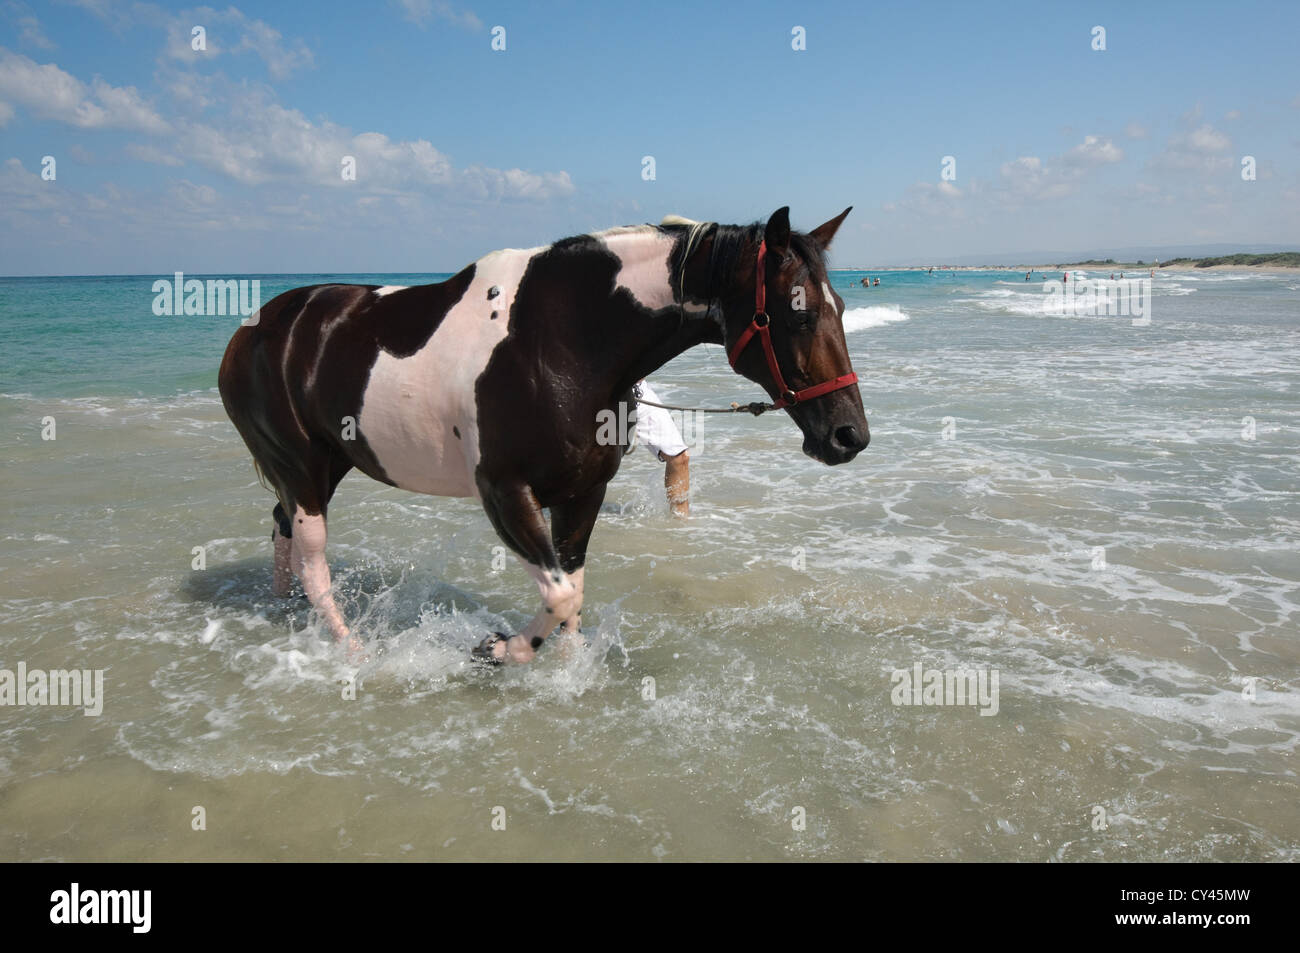 Man Washes his horse in the Mediterranean Sea Stock Photo